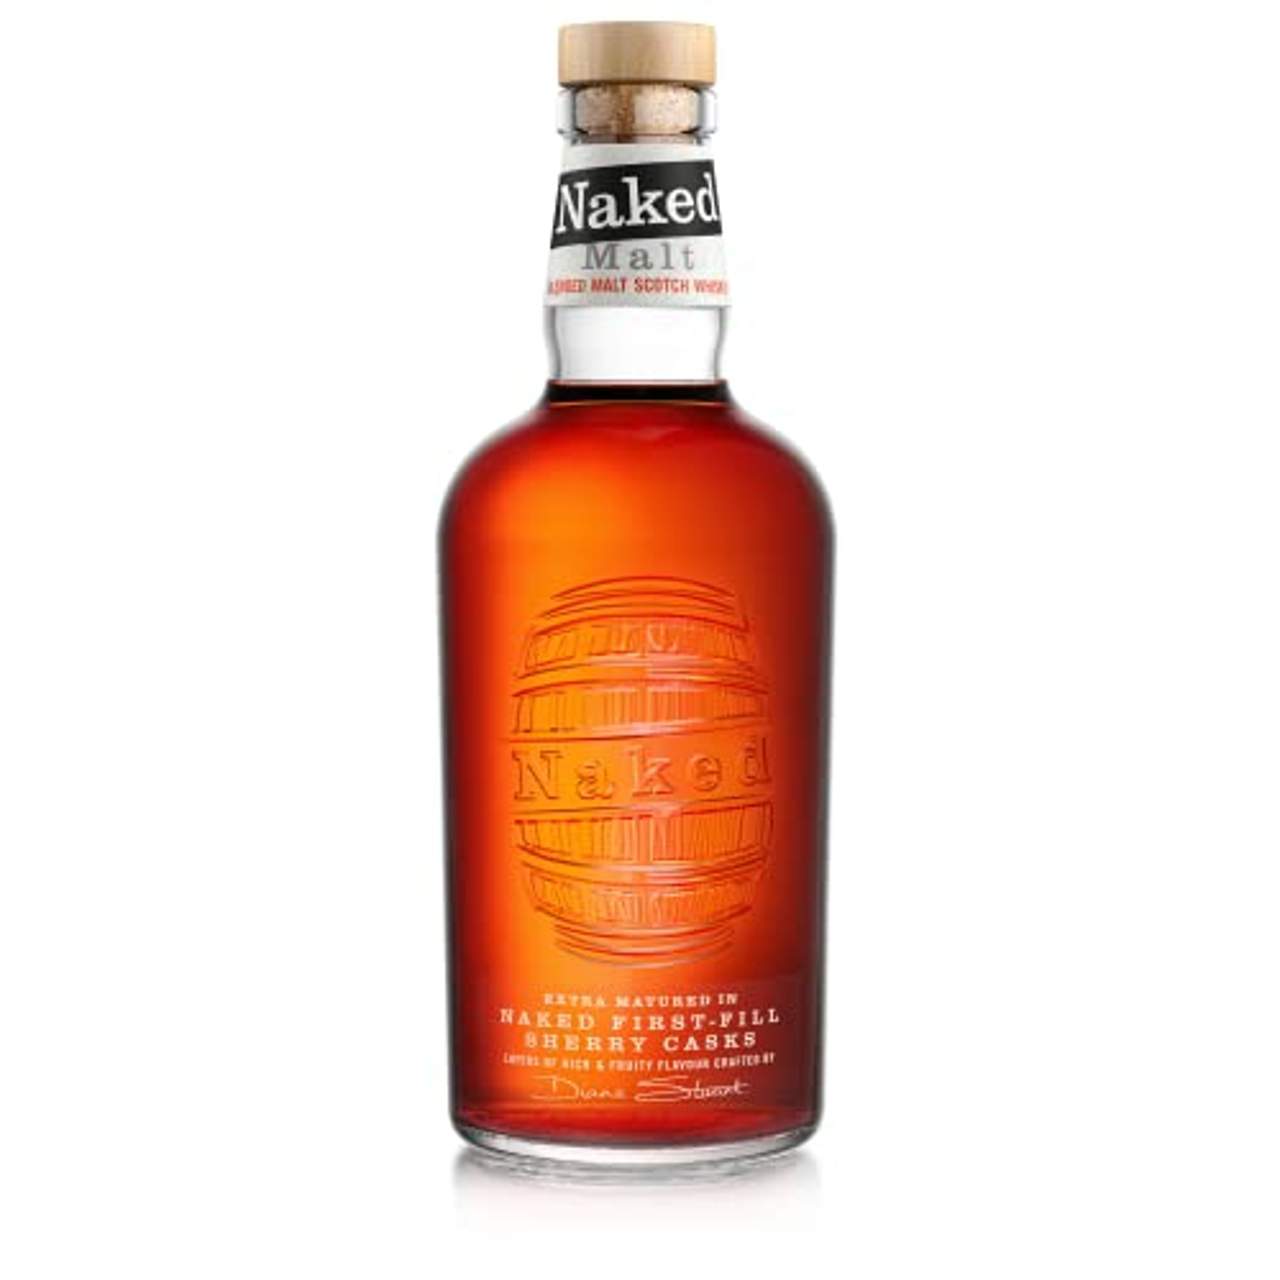 The Naked Grouse Whisky